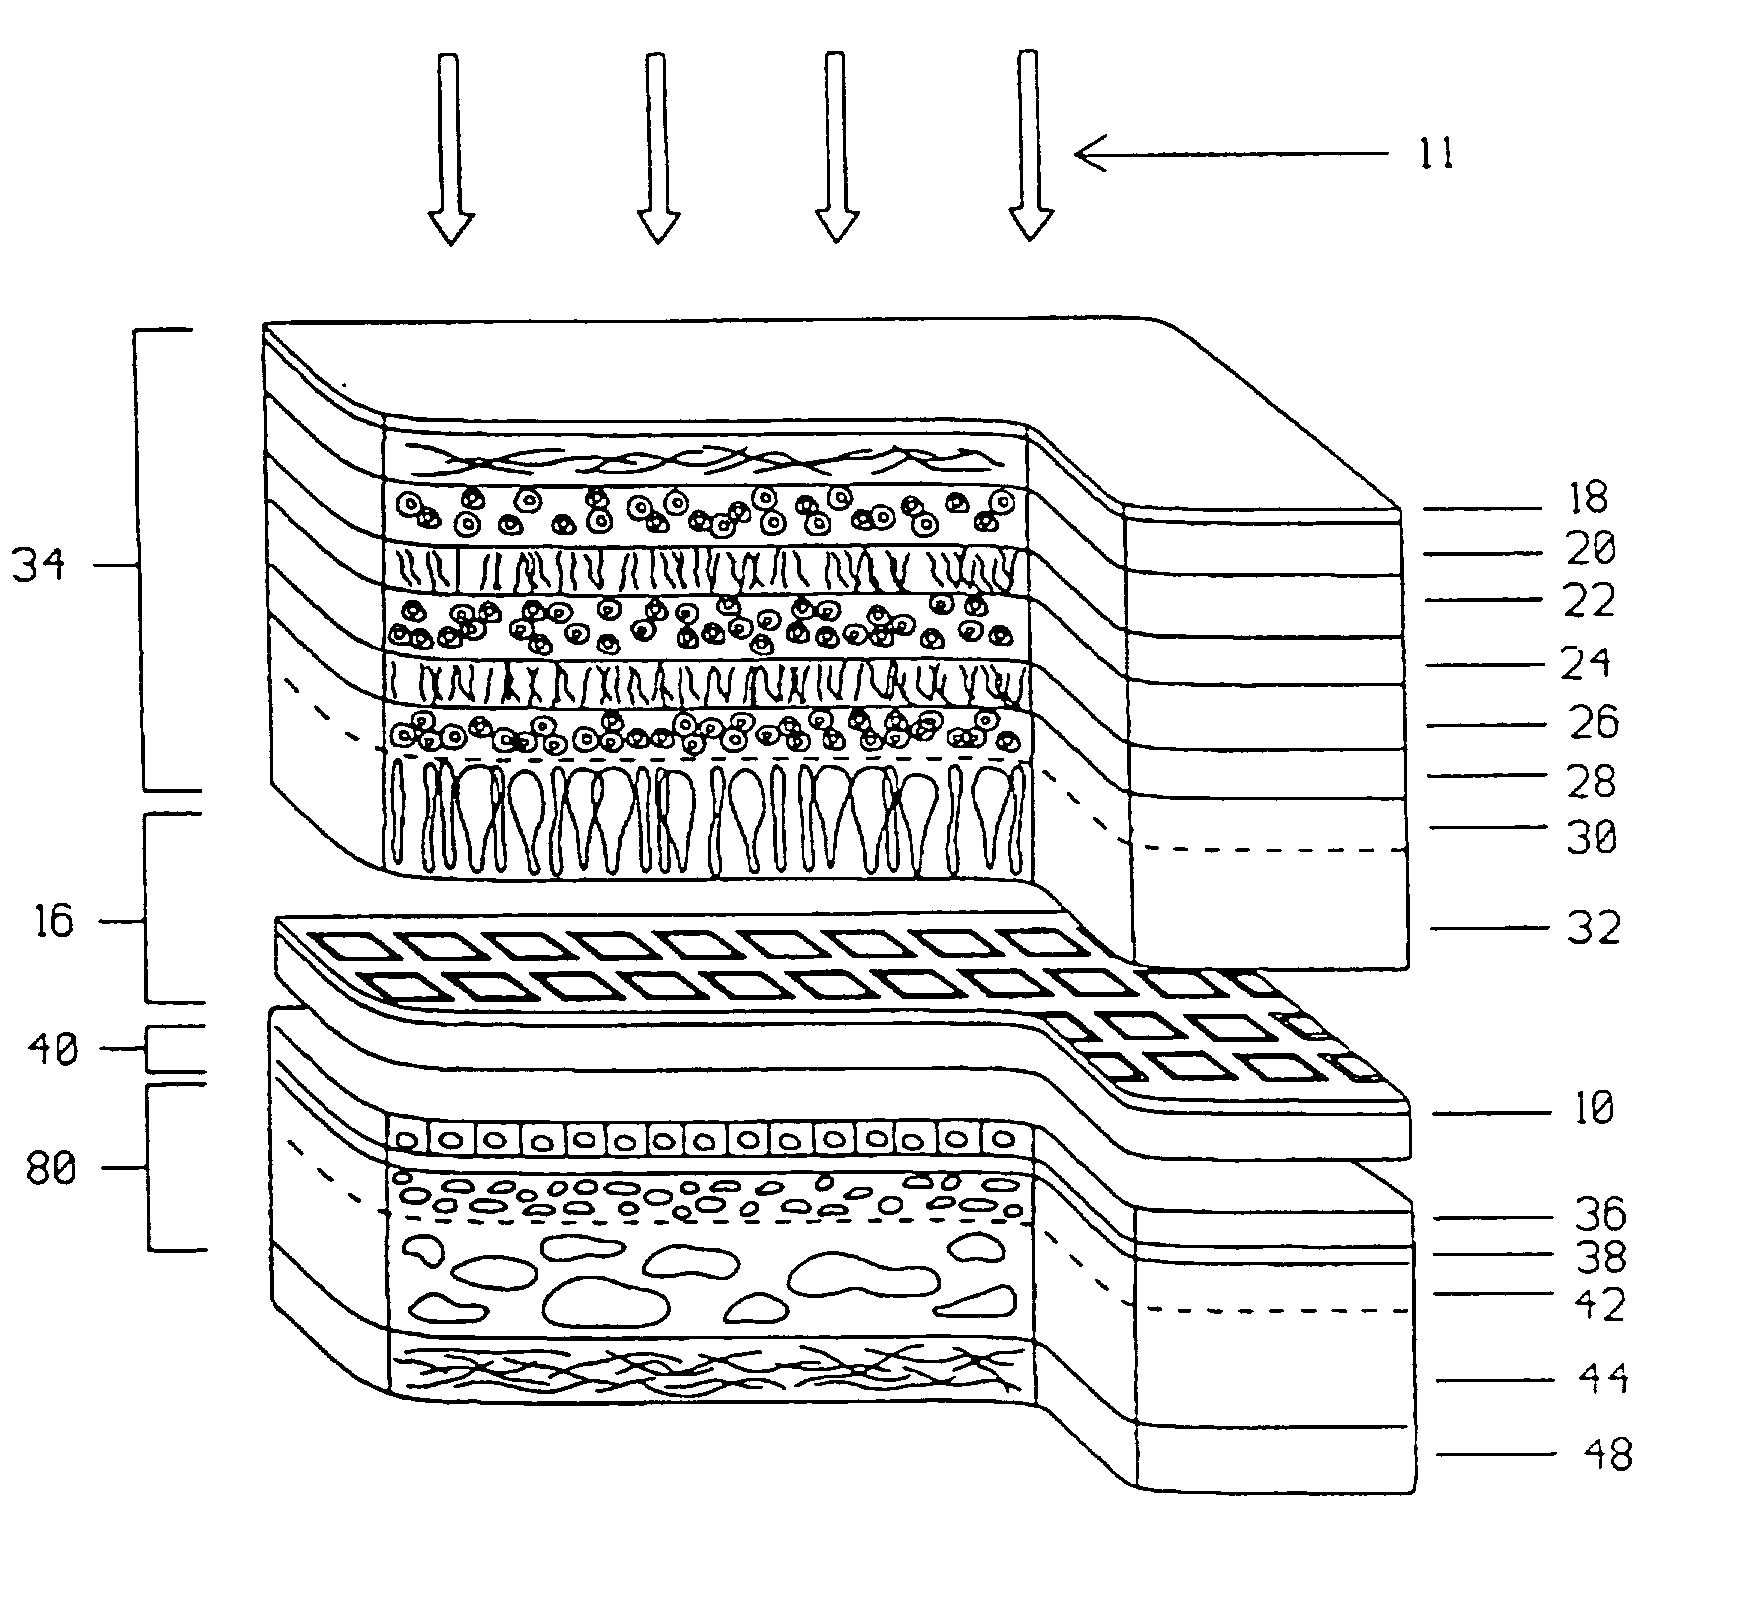 Multi-phasic microphotodetector retinal implant with variable voltage and current capability and apparatus for insertion